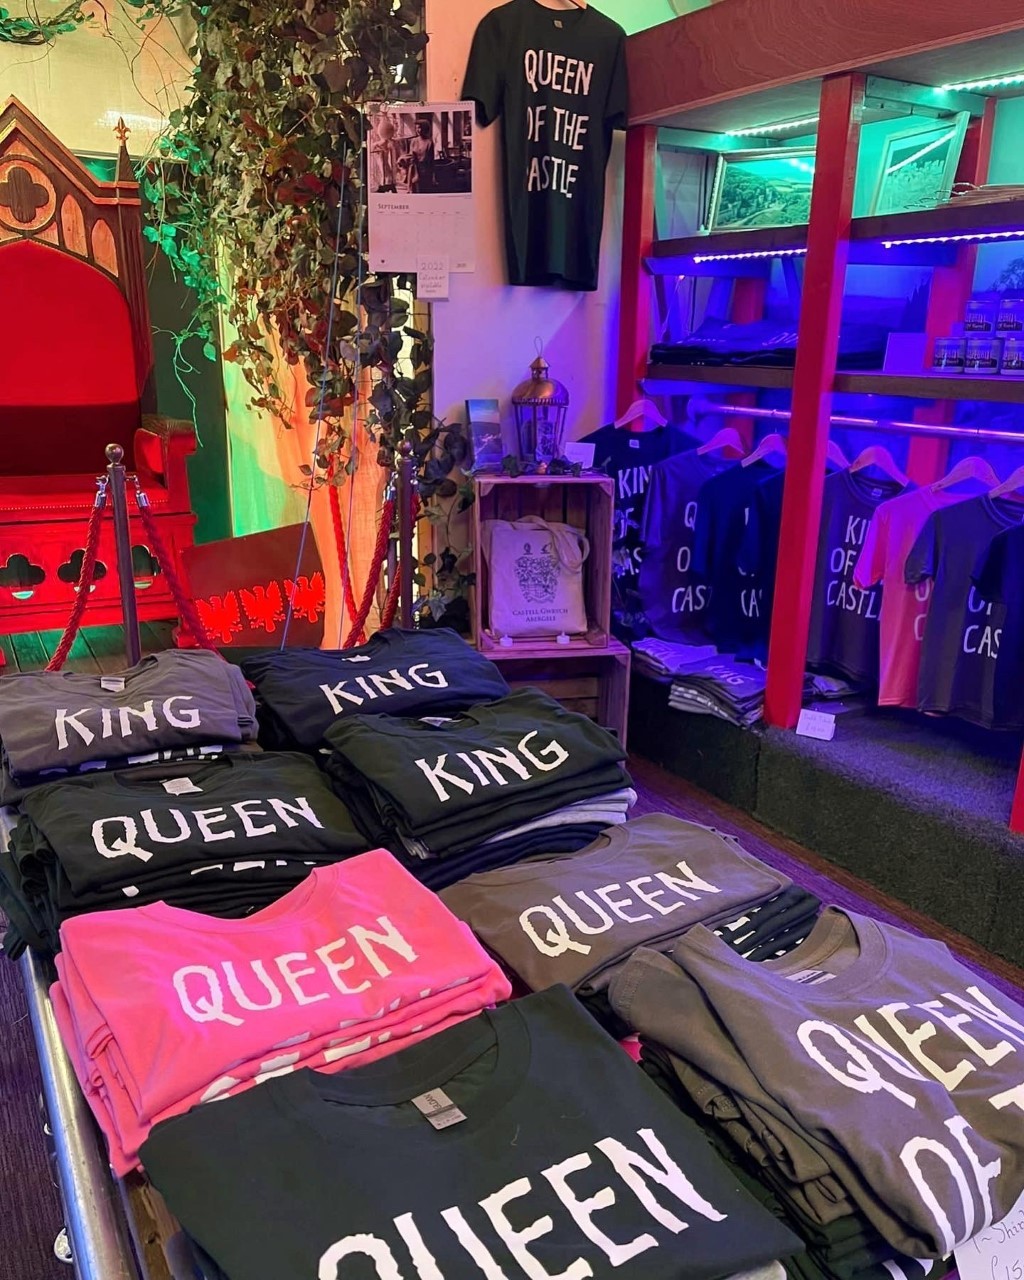 I’m A Celebrity King / Queen t-shirts